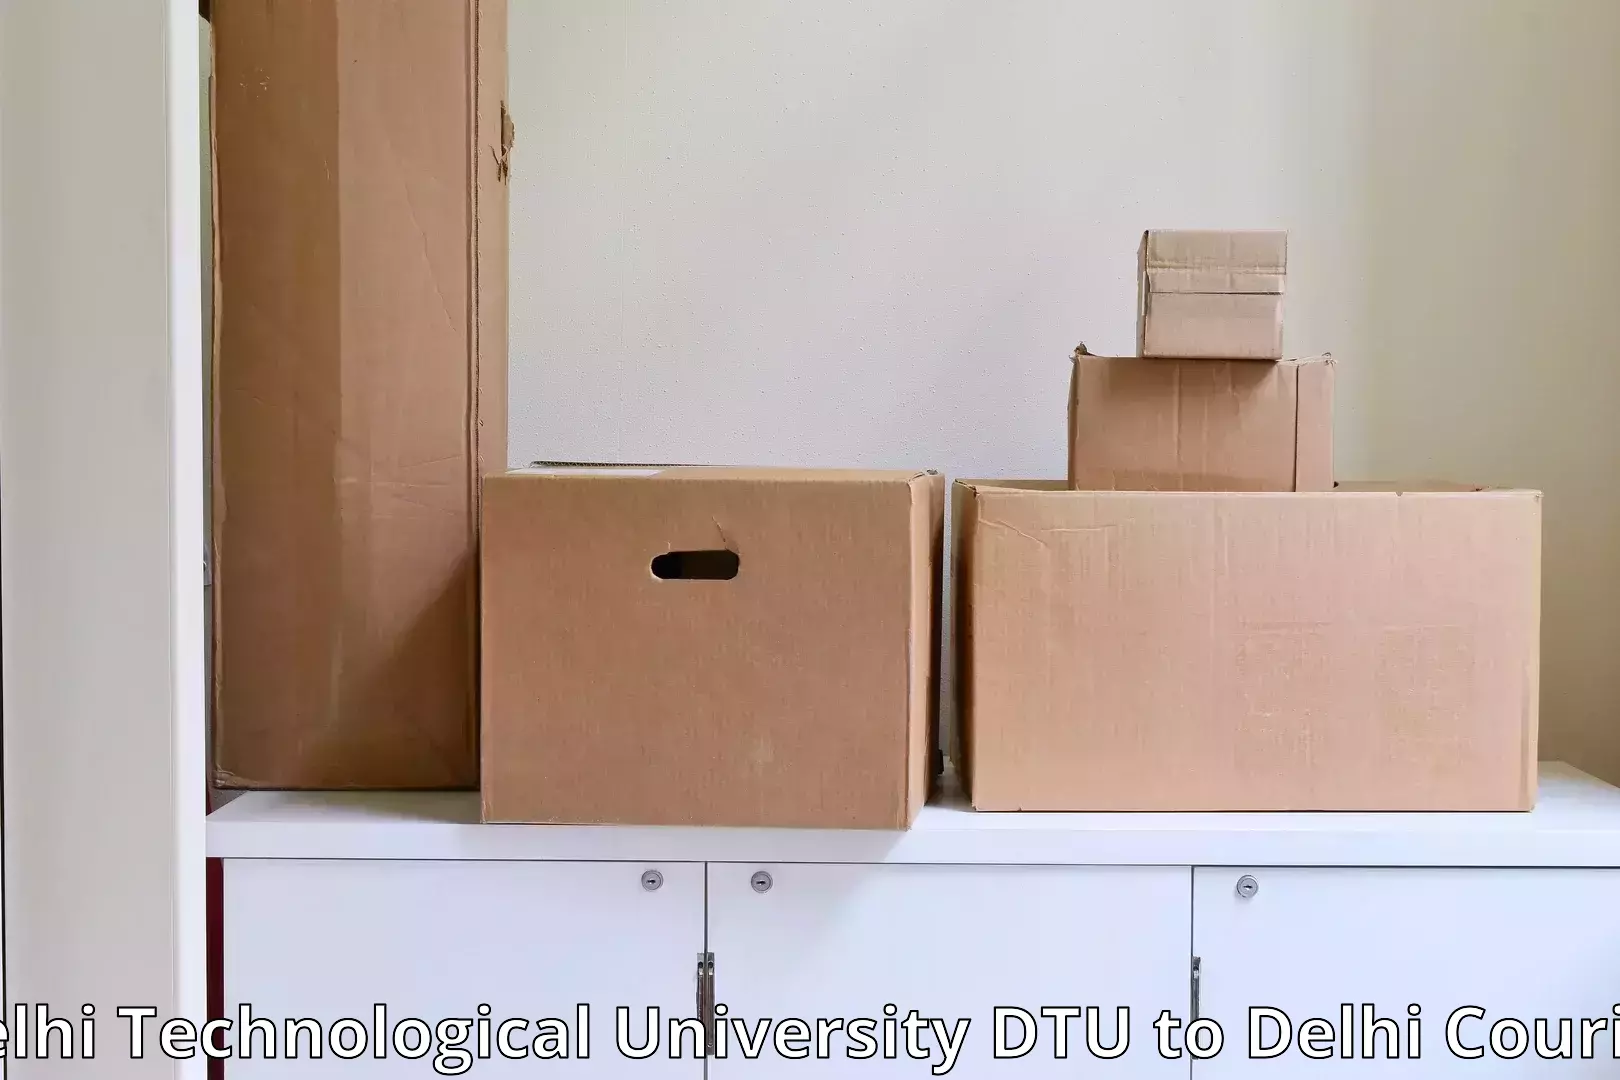 Household moving experts Delhi Technological University DTU to Jhilmil